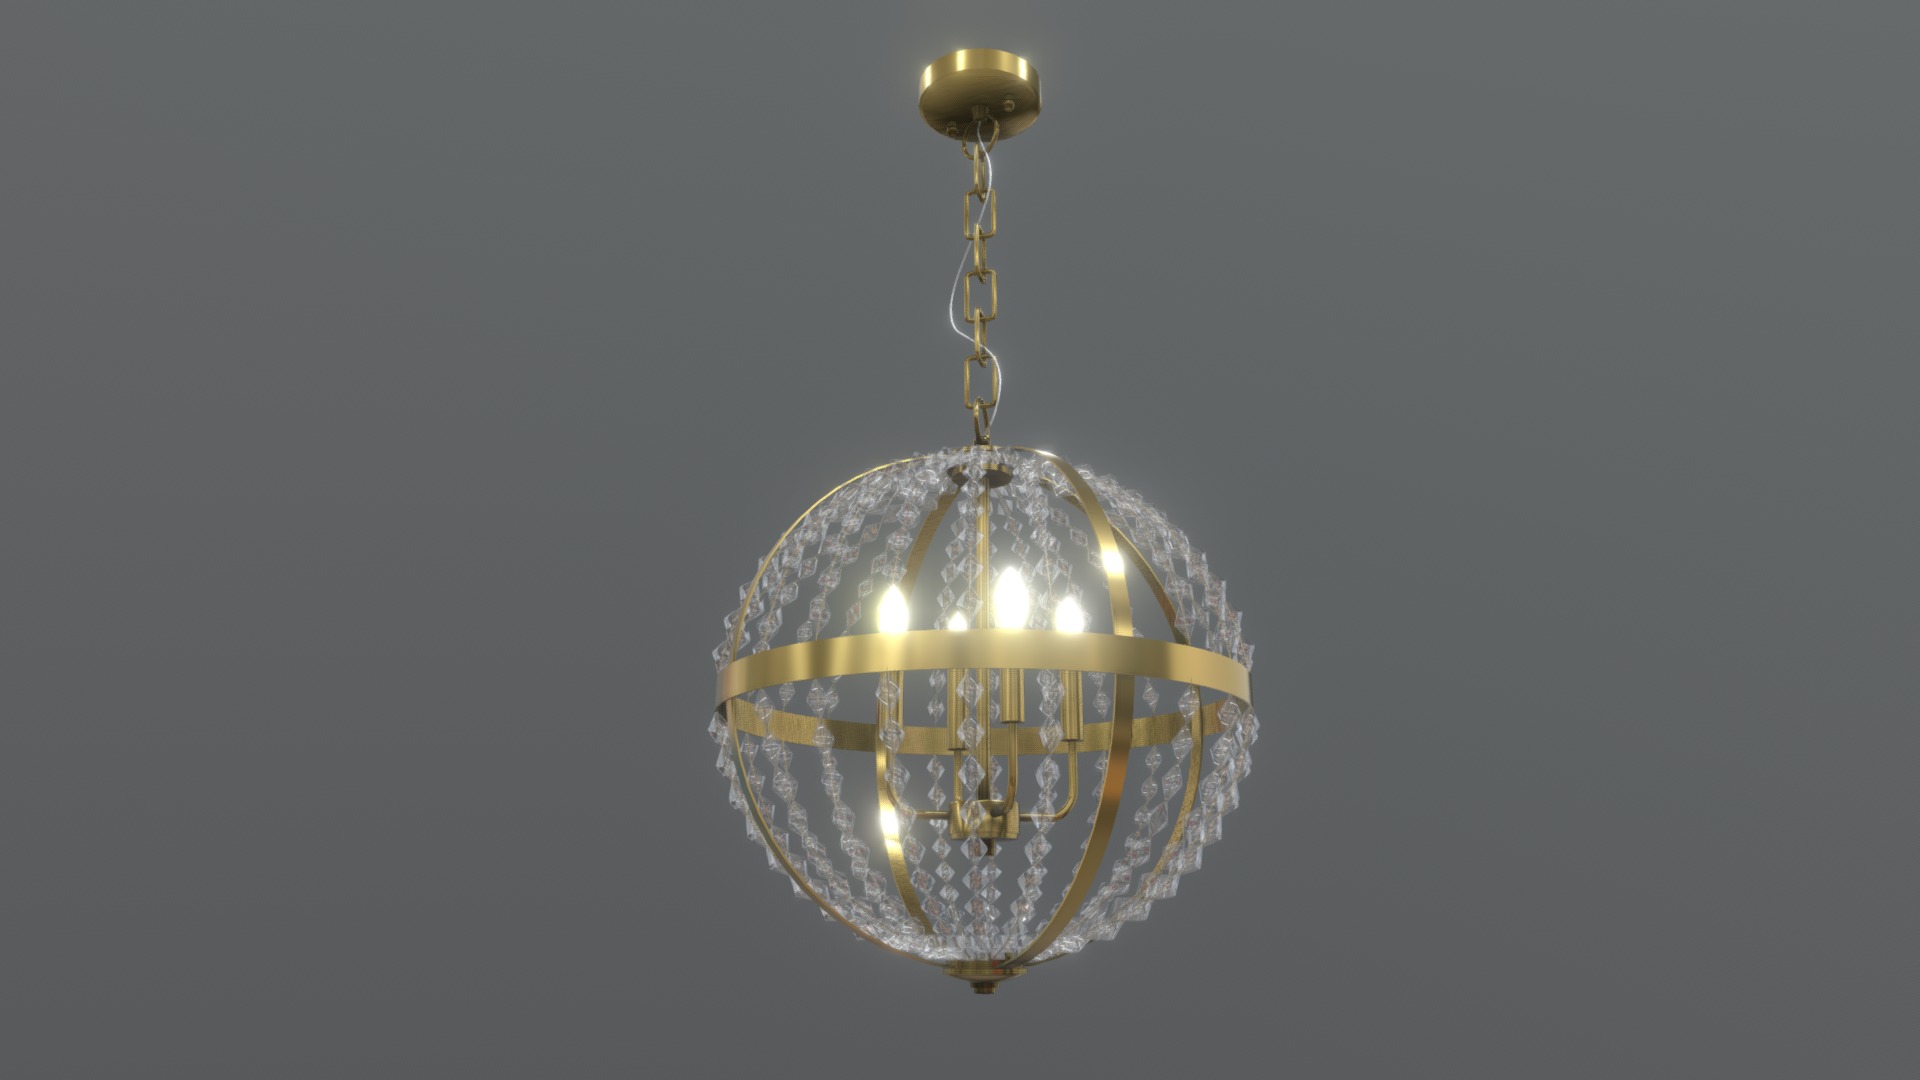 3D model HGP-2018CL-03 - This is a 3D model of the HGP-2018CL-03. The 3D model is about a chandelier with a light fixture.